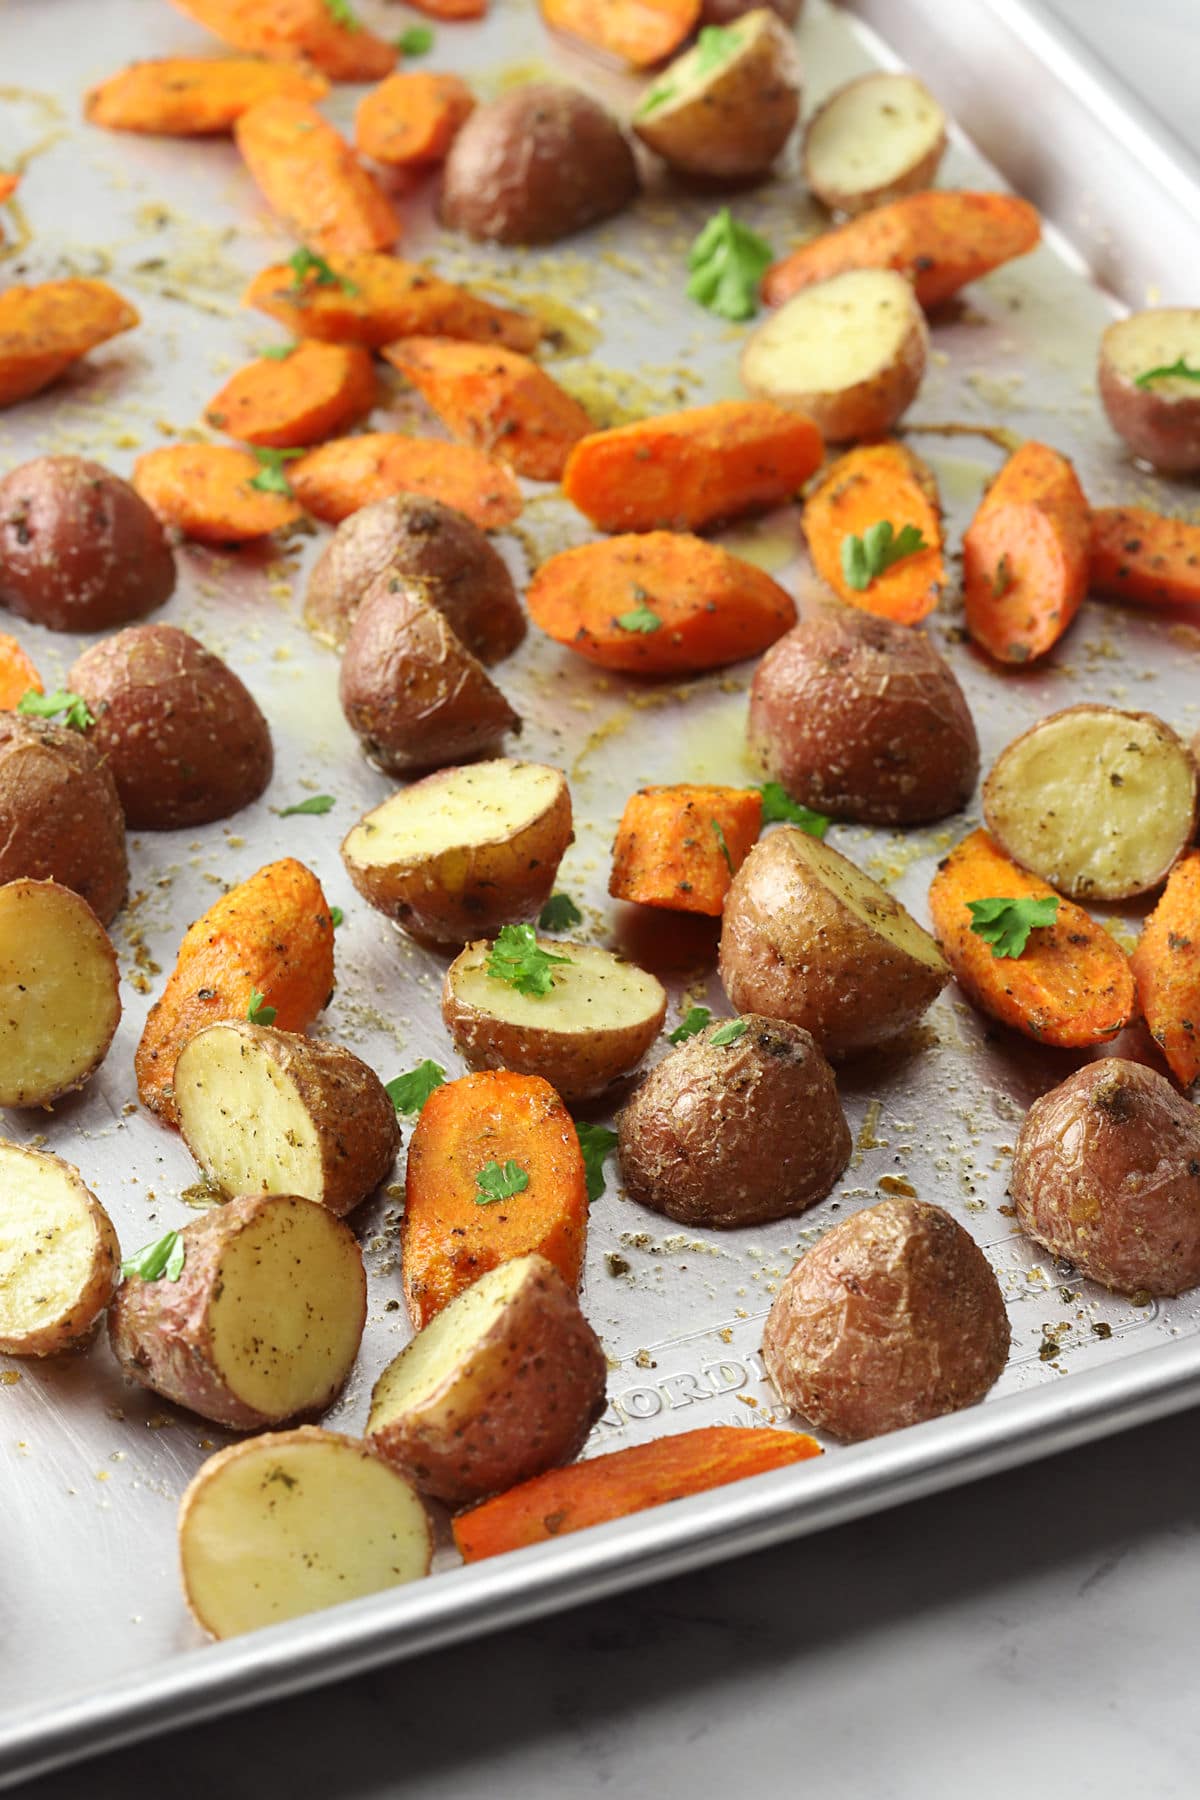 Roasted potatoes and carrots on a metal sheet pan.